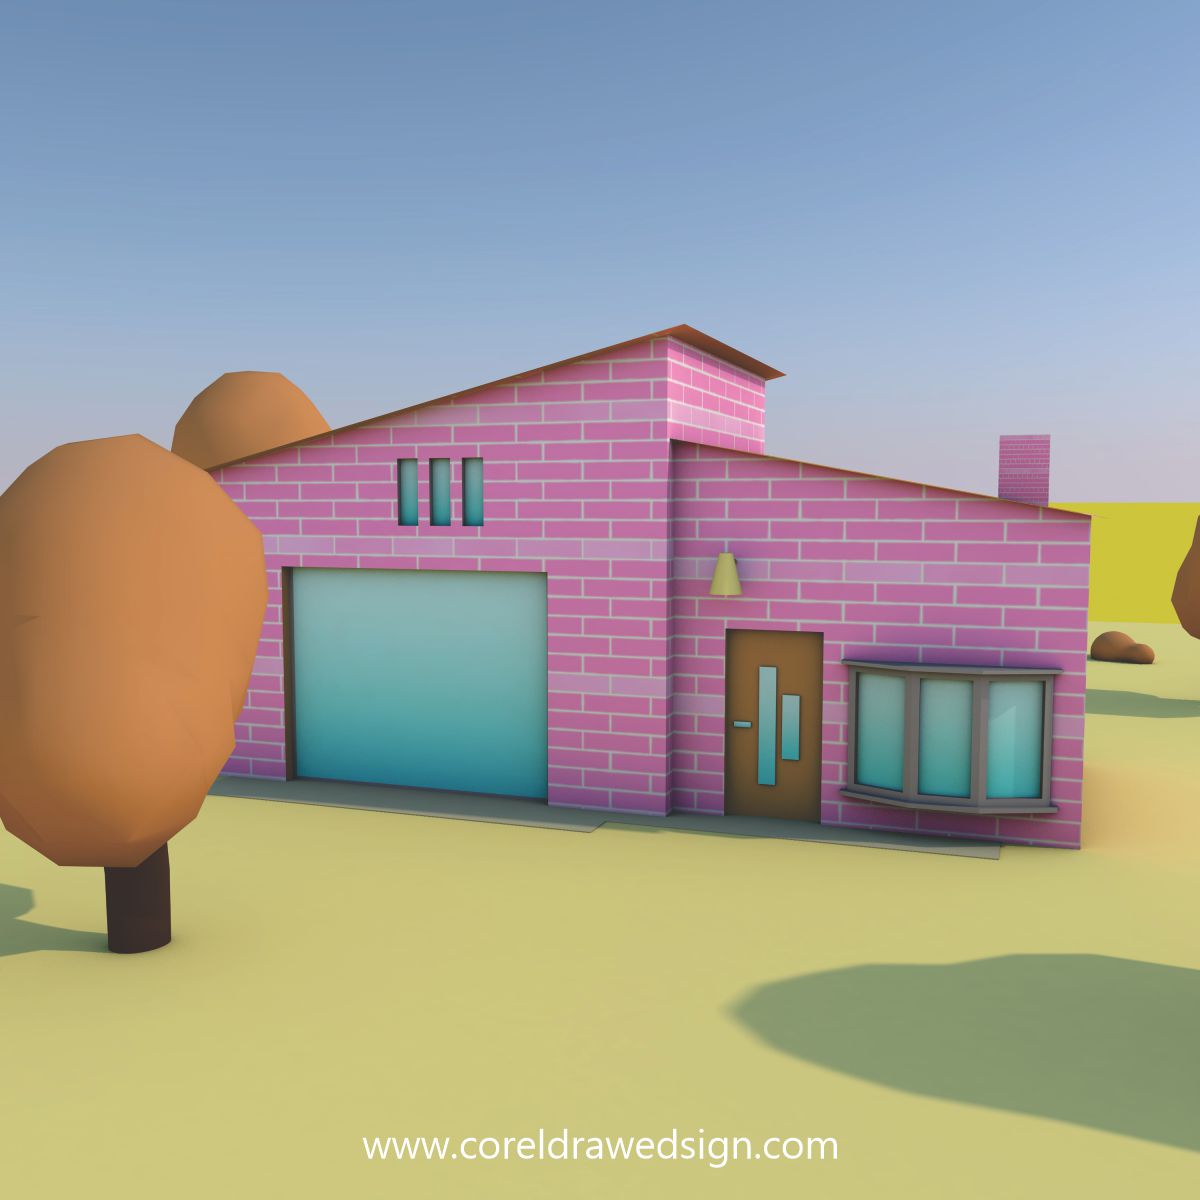 Download Animated House Background with tree or grass | CorelDraw Design  (Download Free CDR, Vector, Stock Images, Tutorials, Tips & Tricks)